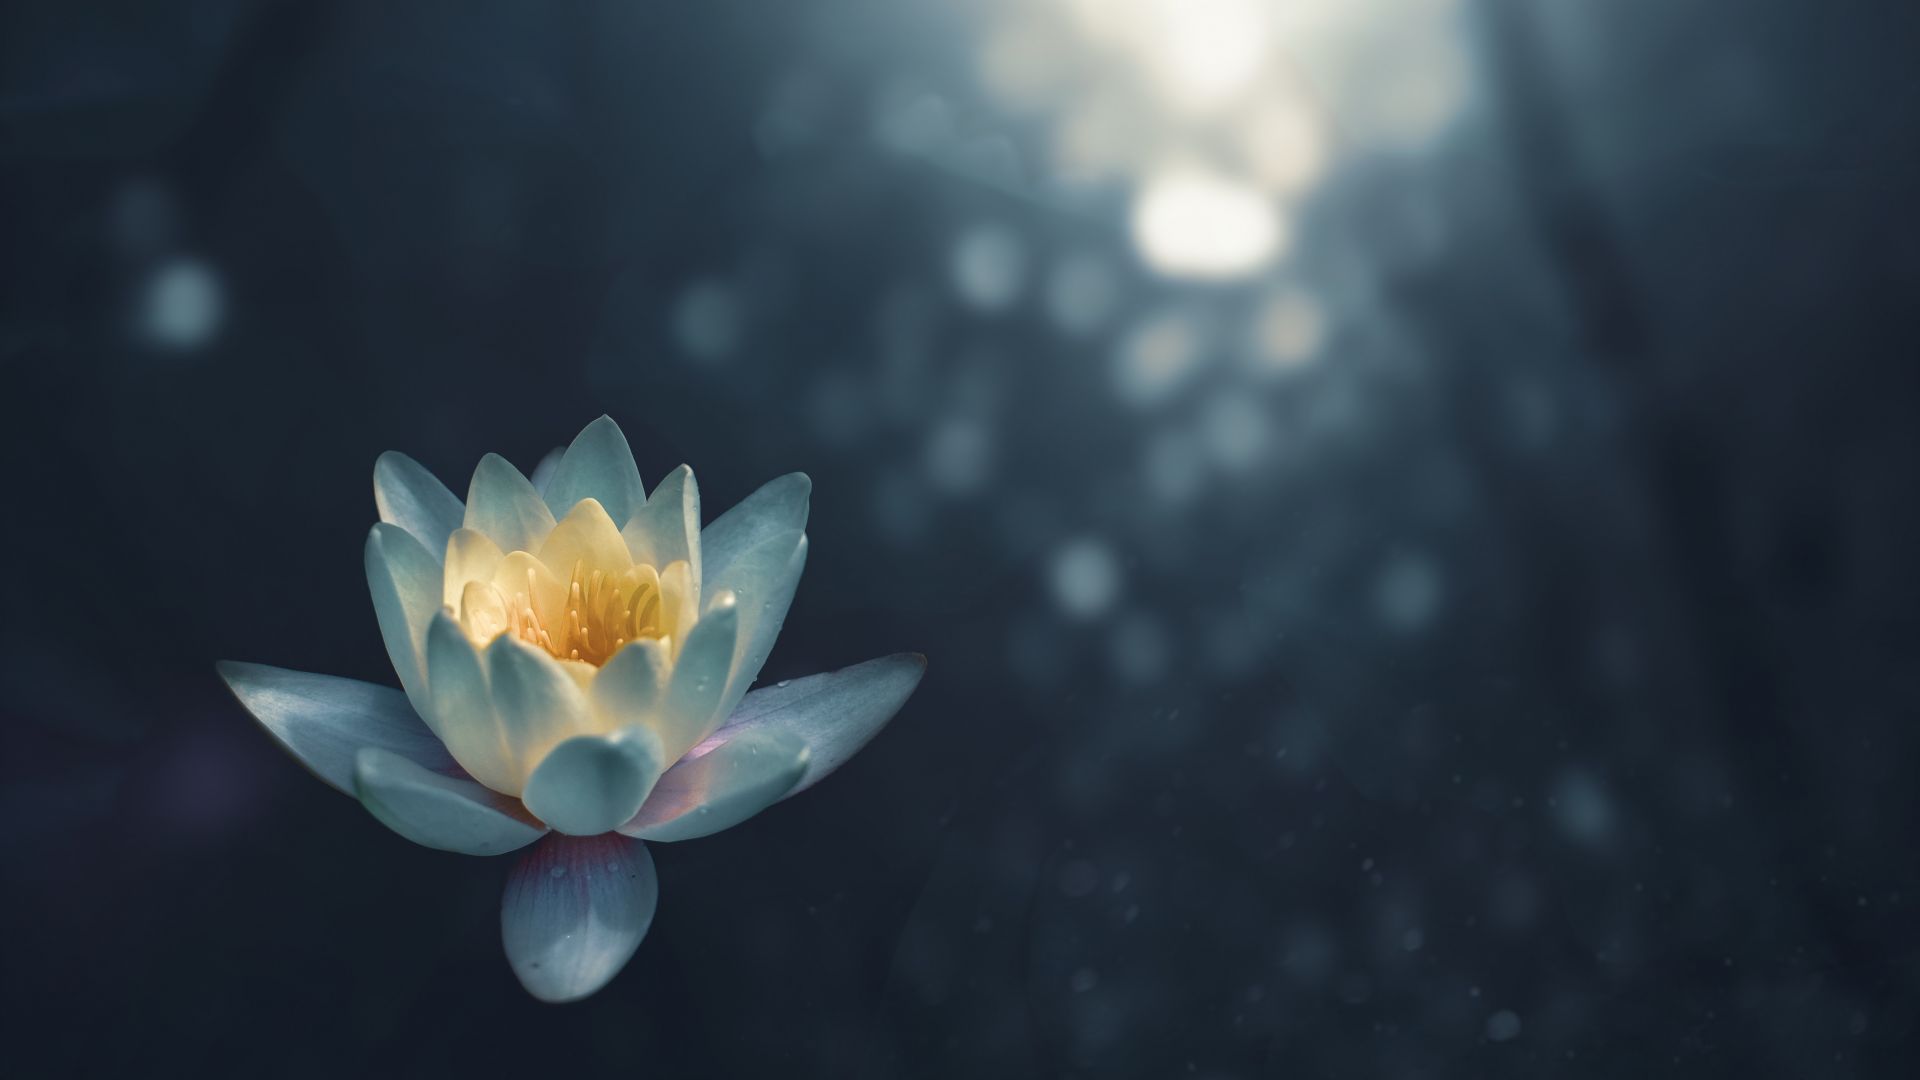 Desktop Wallpaper Reflections, Lake, Water Lily, White Flower, Hd Image,  Picture, Background, A98cf6